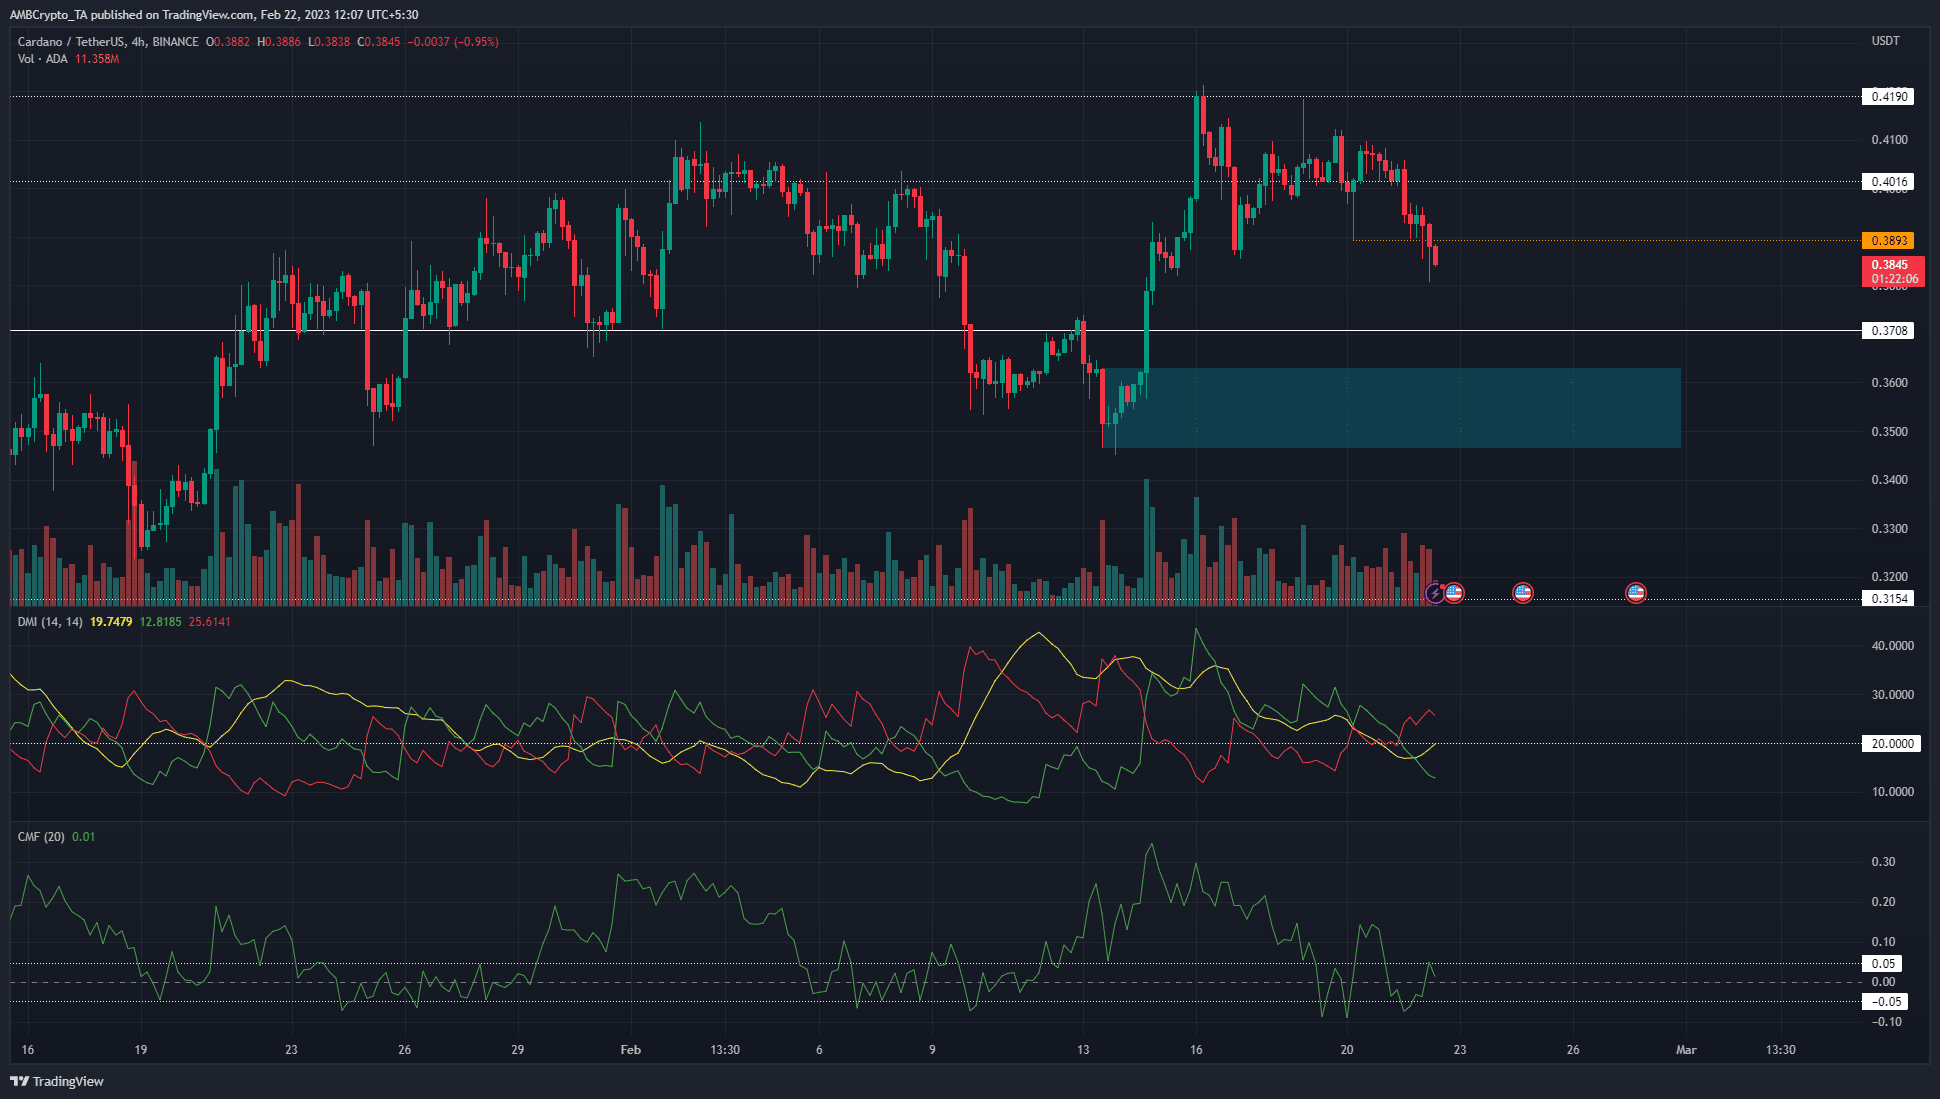 Cardano breaks previous bullish structure after rejection at $0.41